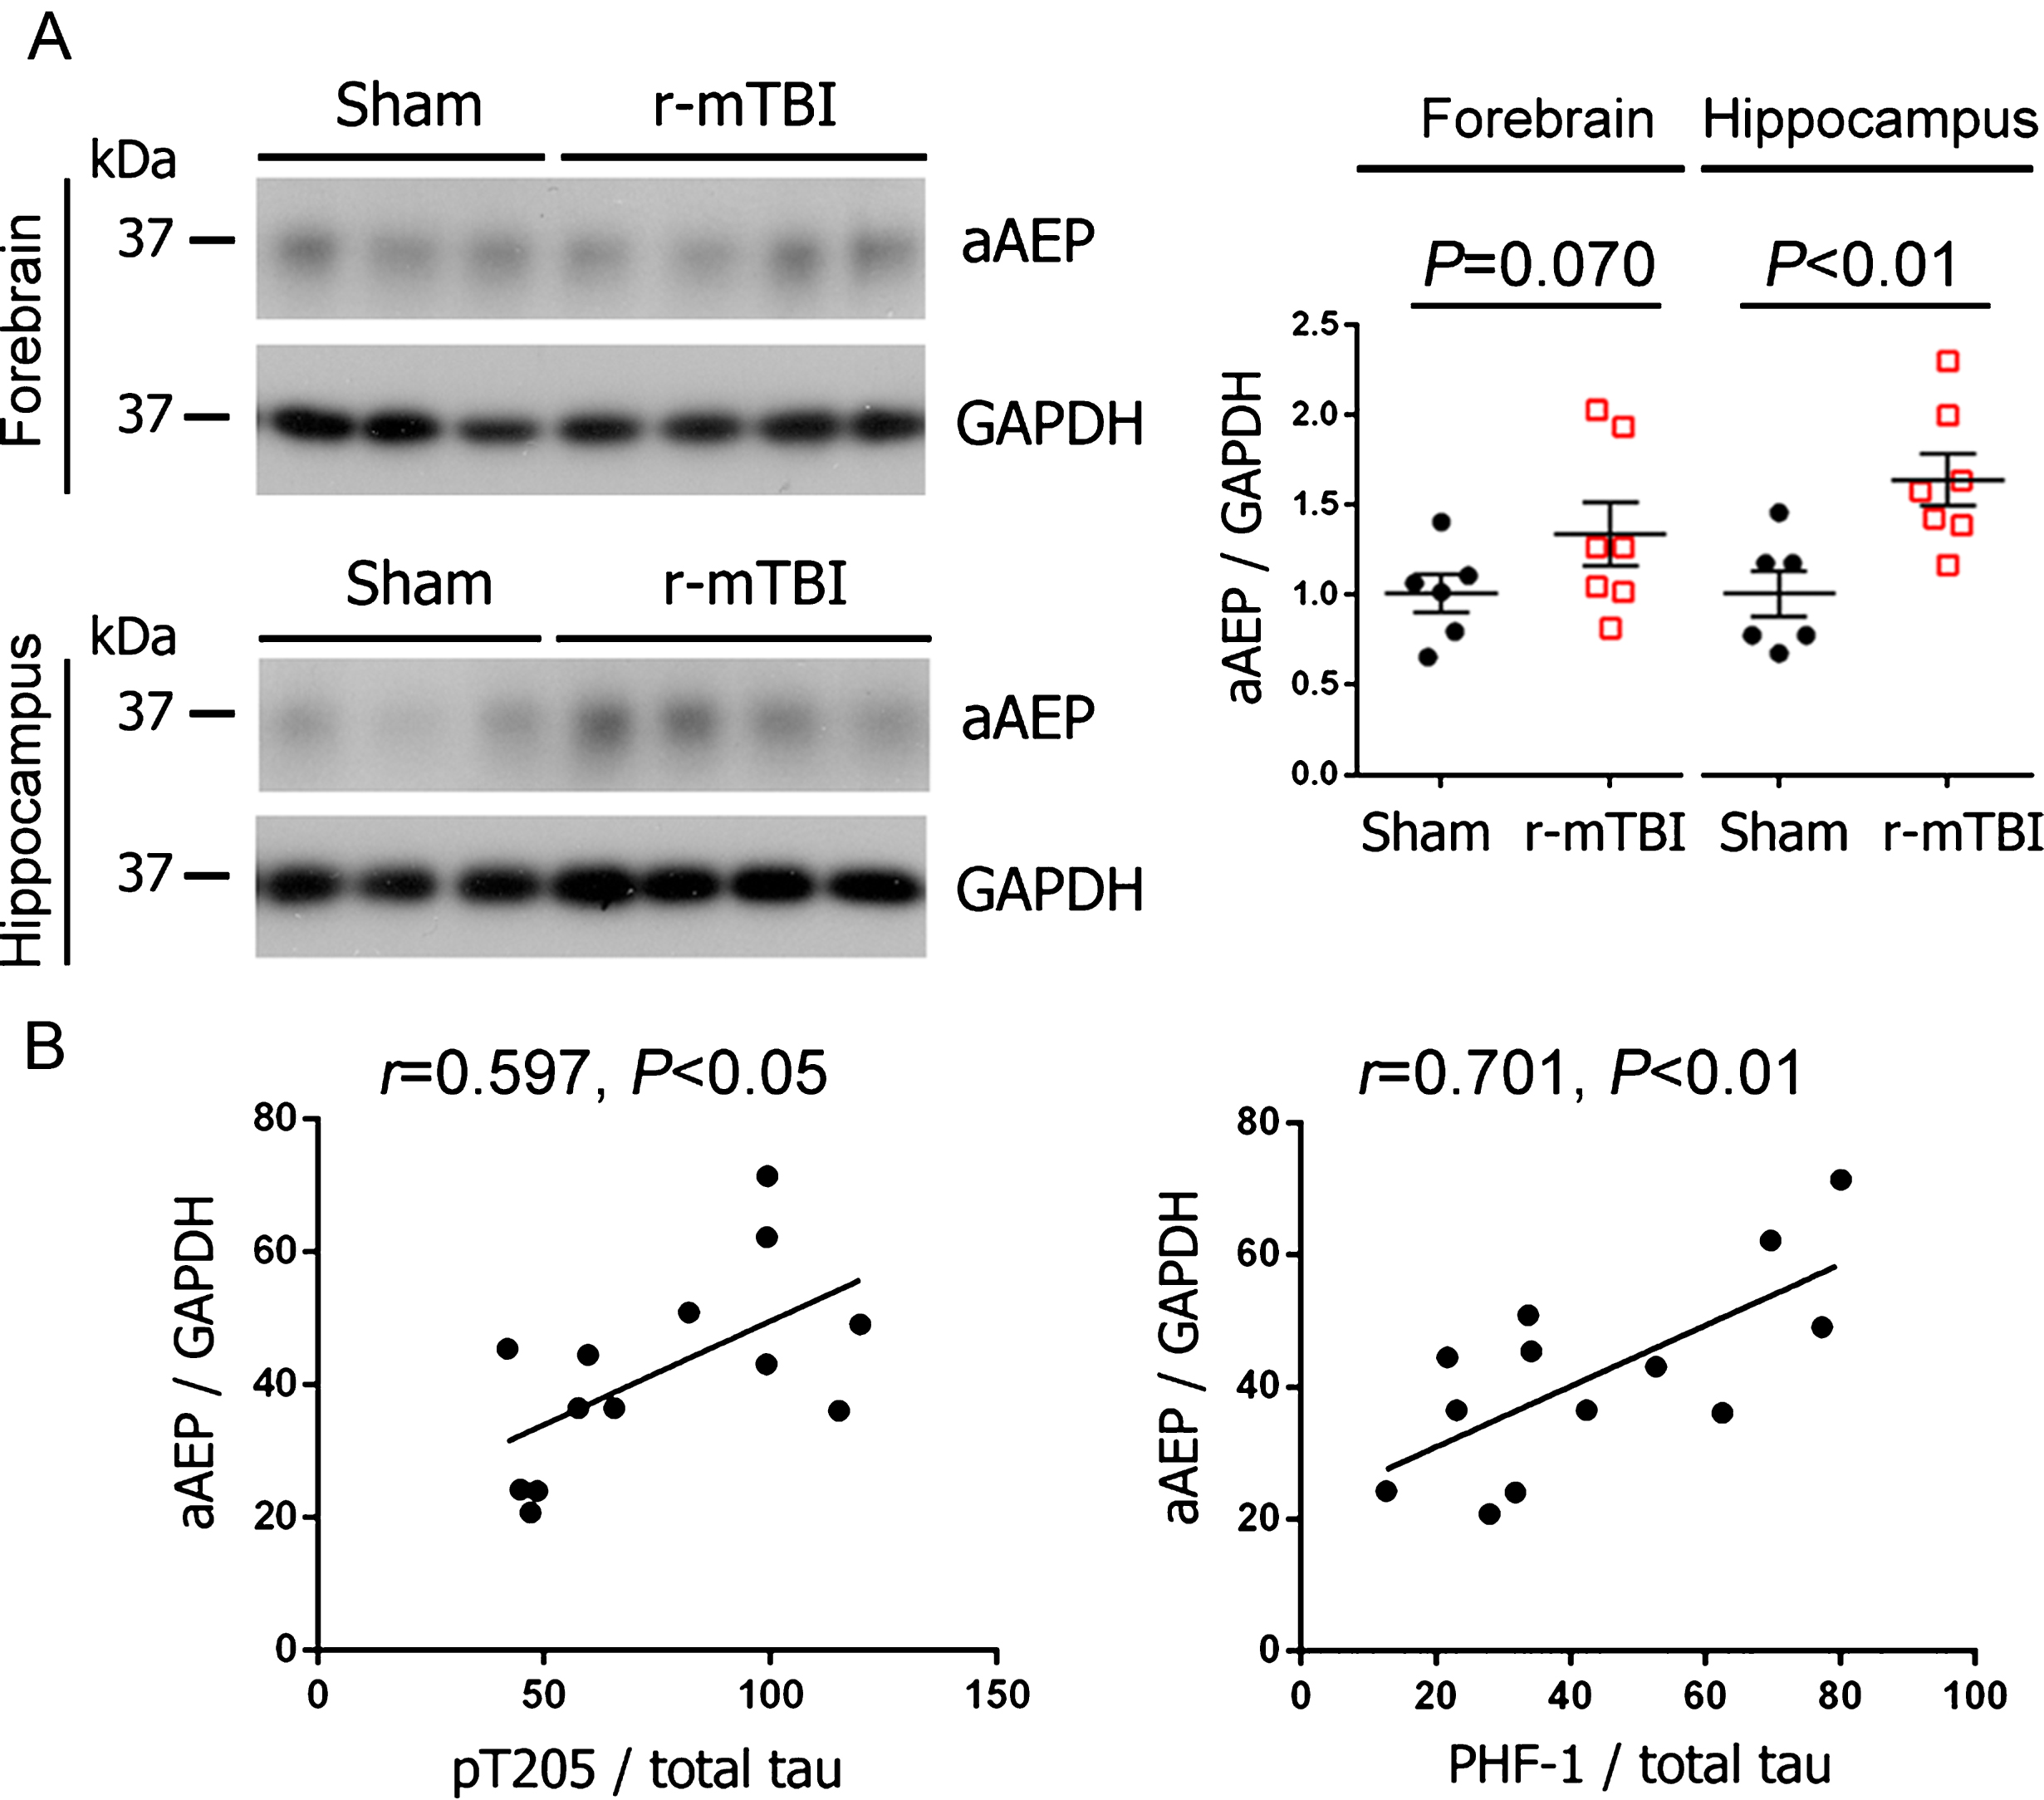 Activation of AEP is increased in the brain and correlated with the level of hyperphosphorylated tau following r-mTBI in 3xTg-AD mice. A) Representative western blots and quantification showing the level of active AEP (aAEP). Data are expressed as scattered dot plots with mean±SEM (n = 6-7 mice/group) and analyzed with unpaired Student t test. B) Pearson correlation of aAEP level to the level of indicated phospho-tau in the hippocampus.